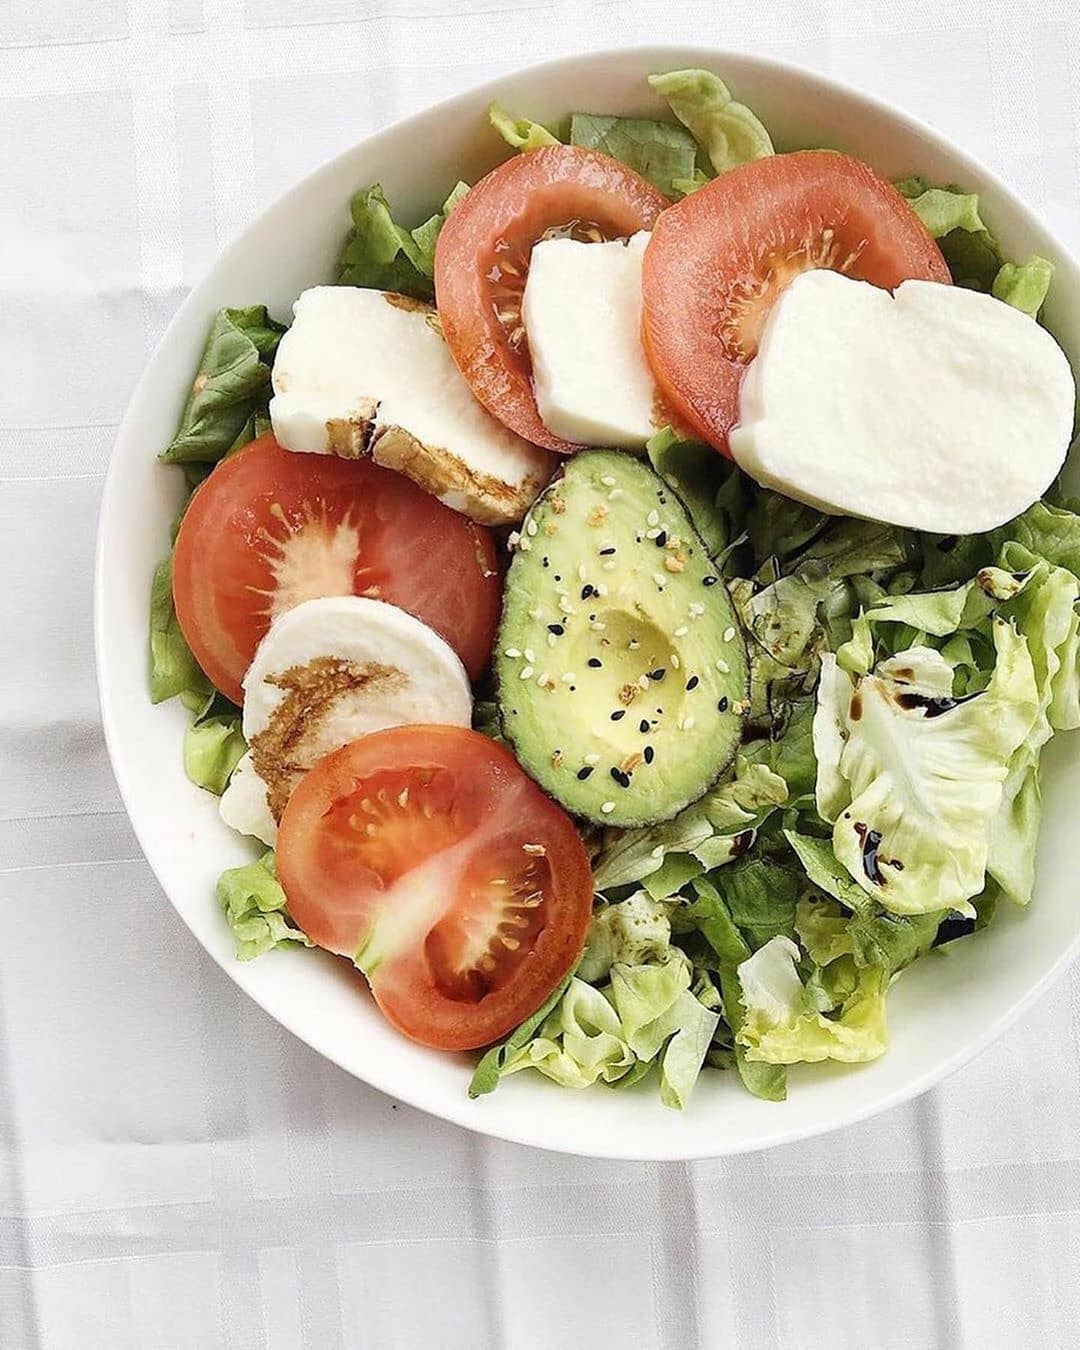 Six Easy and Delicious Salad Ideas